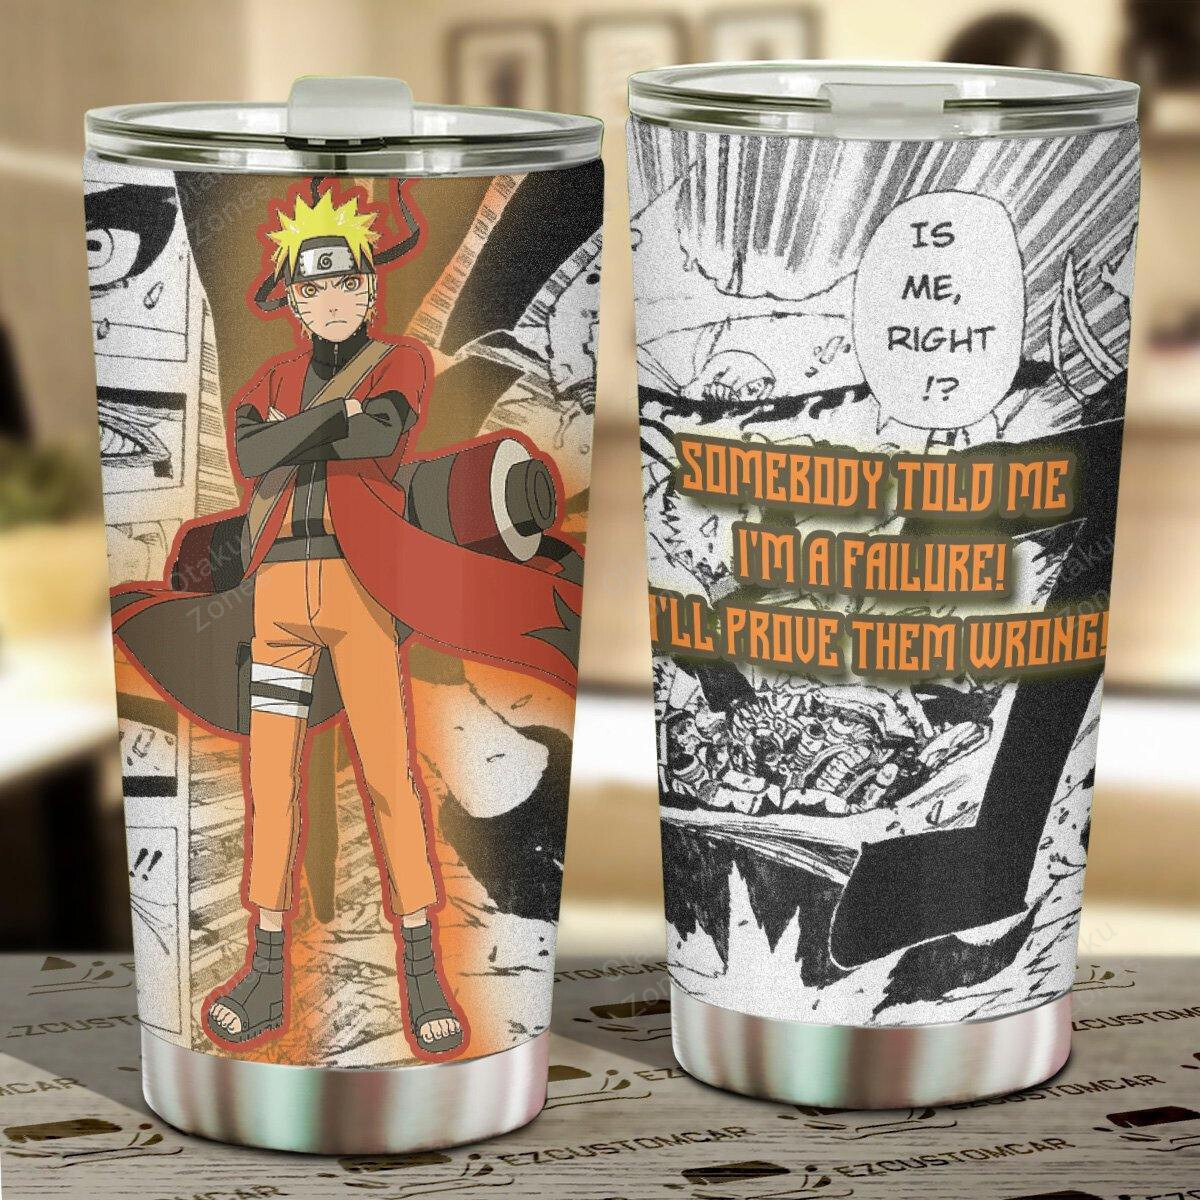 Go ahead and order your new tumbler now! 72